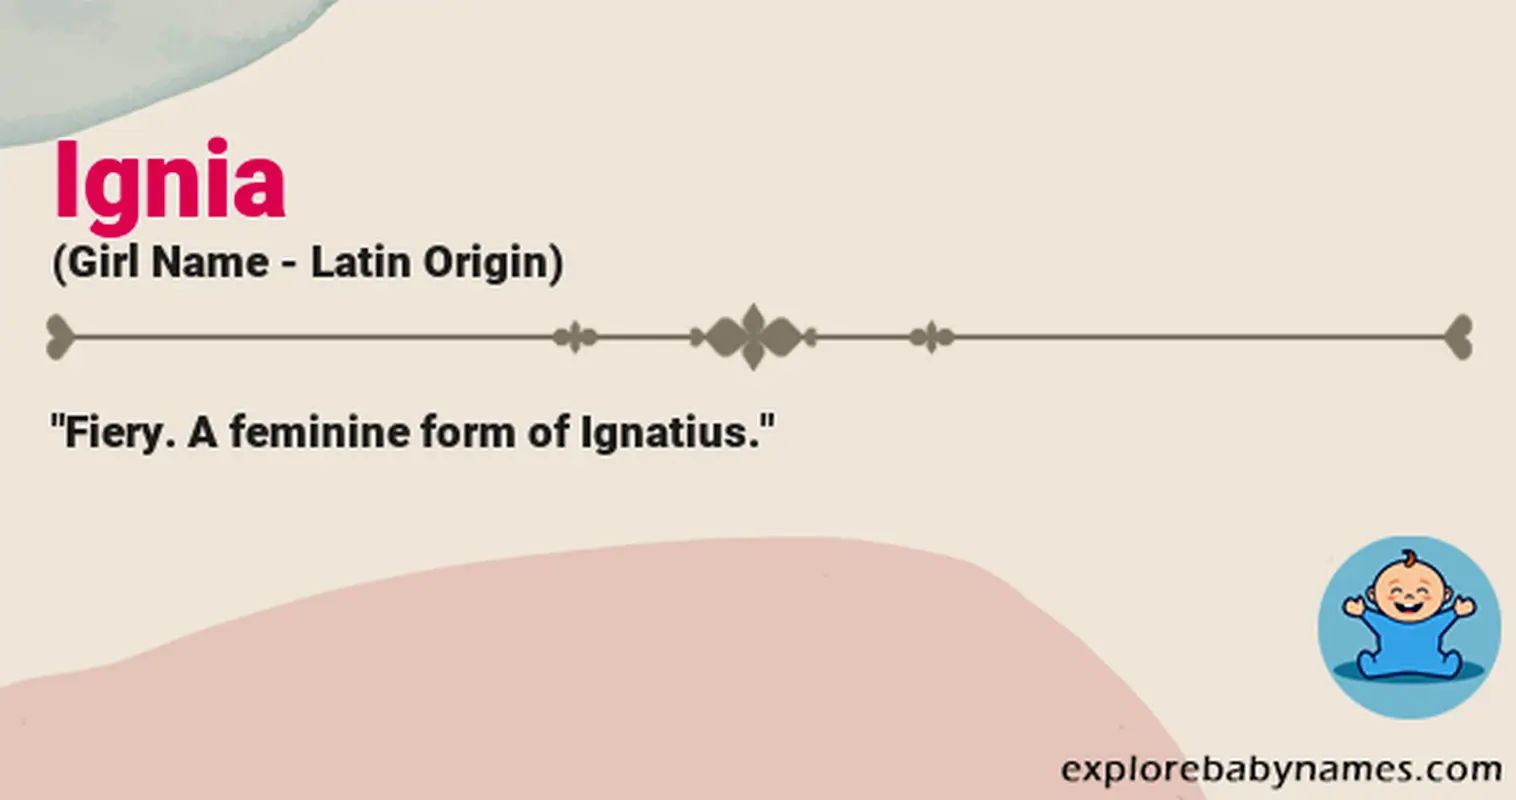 Meaning of Ignia